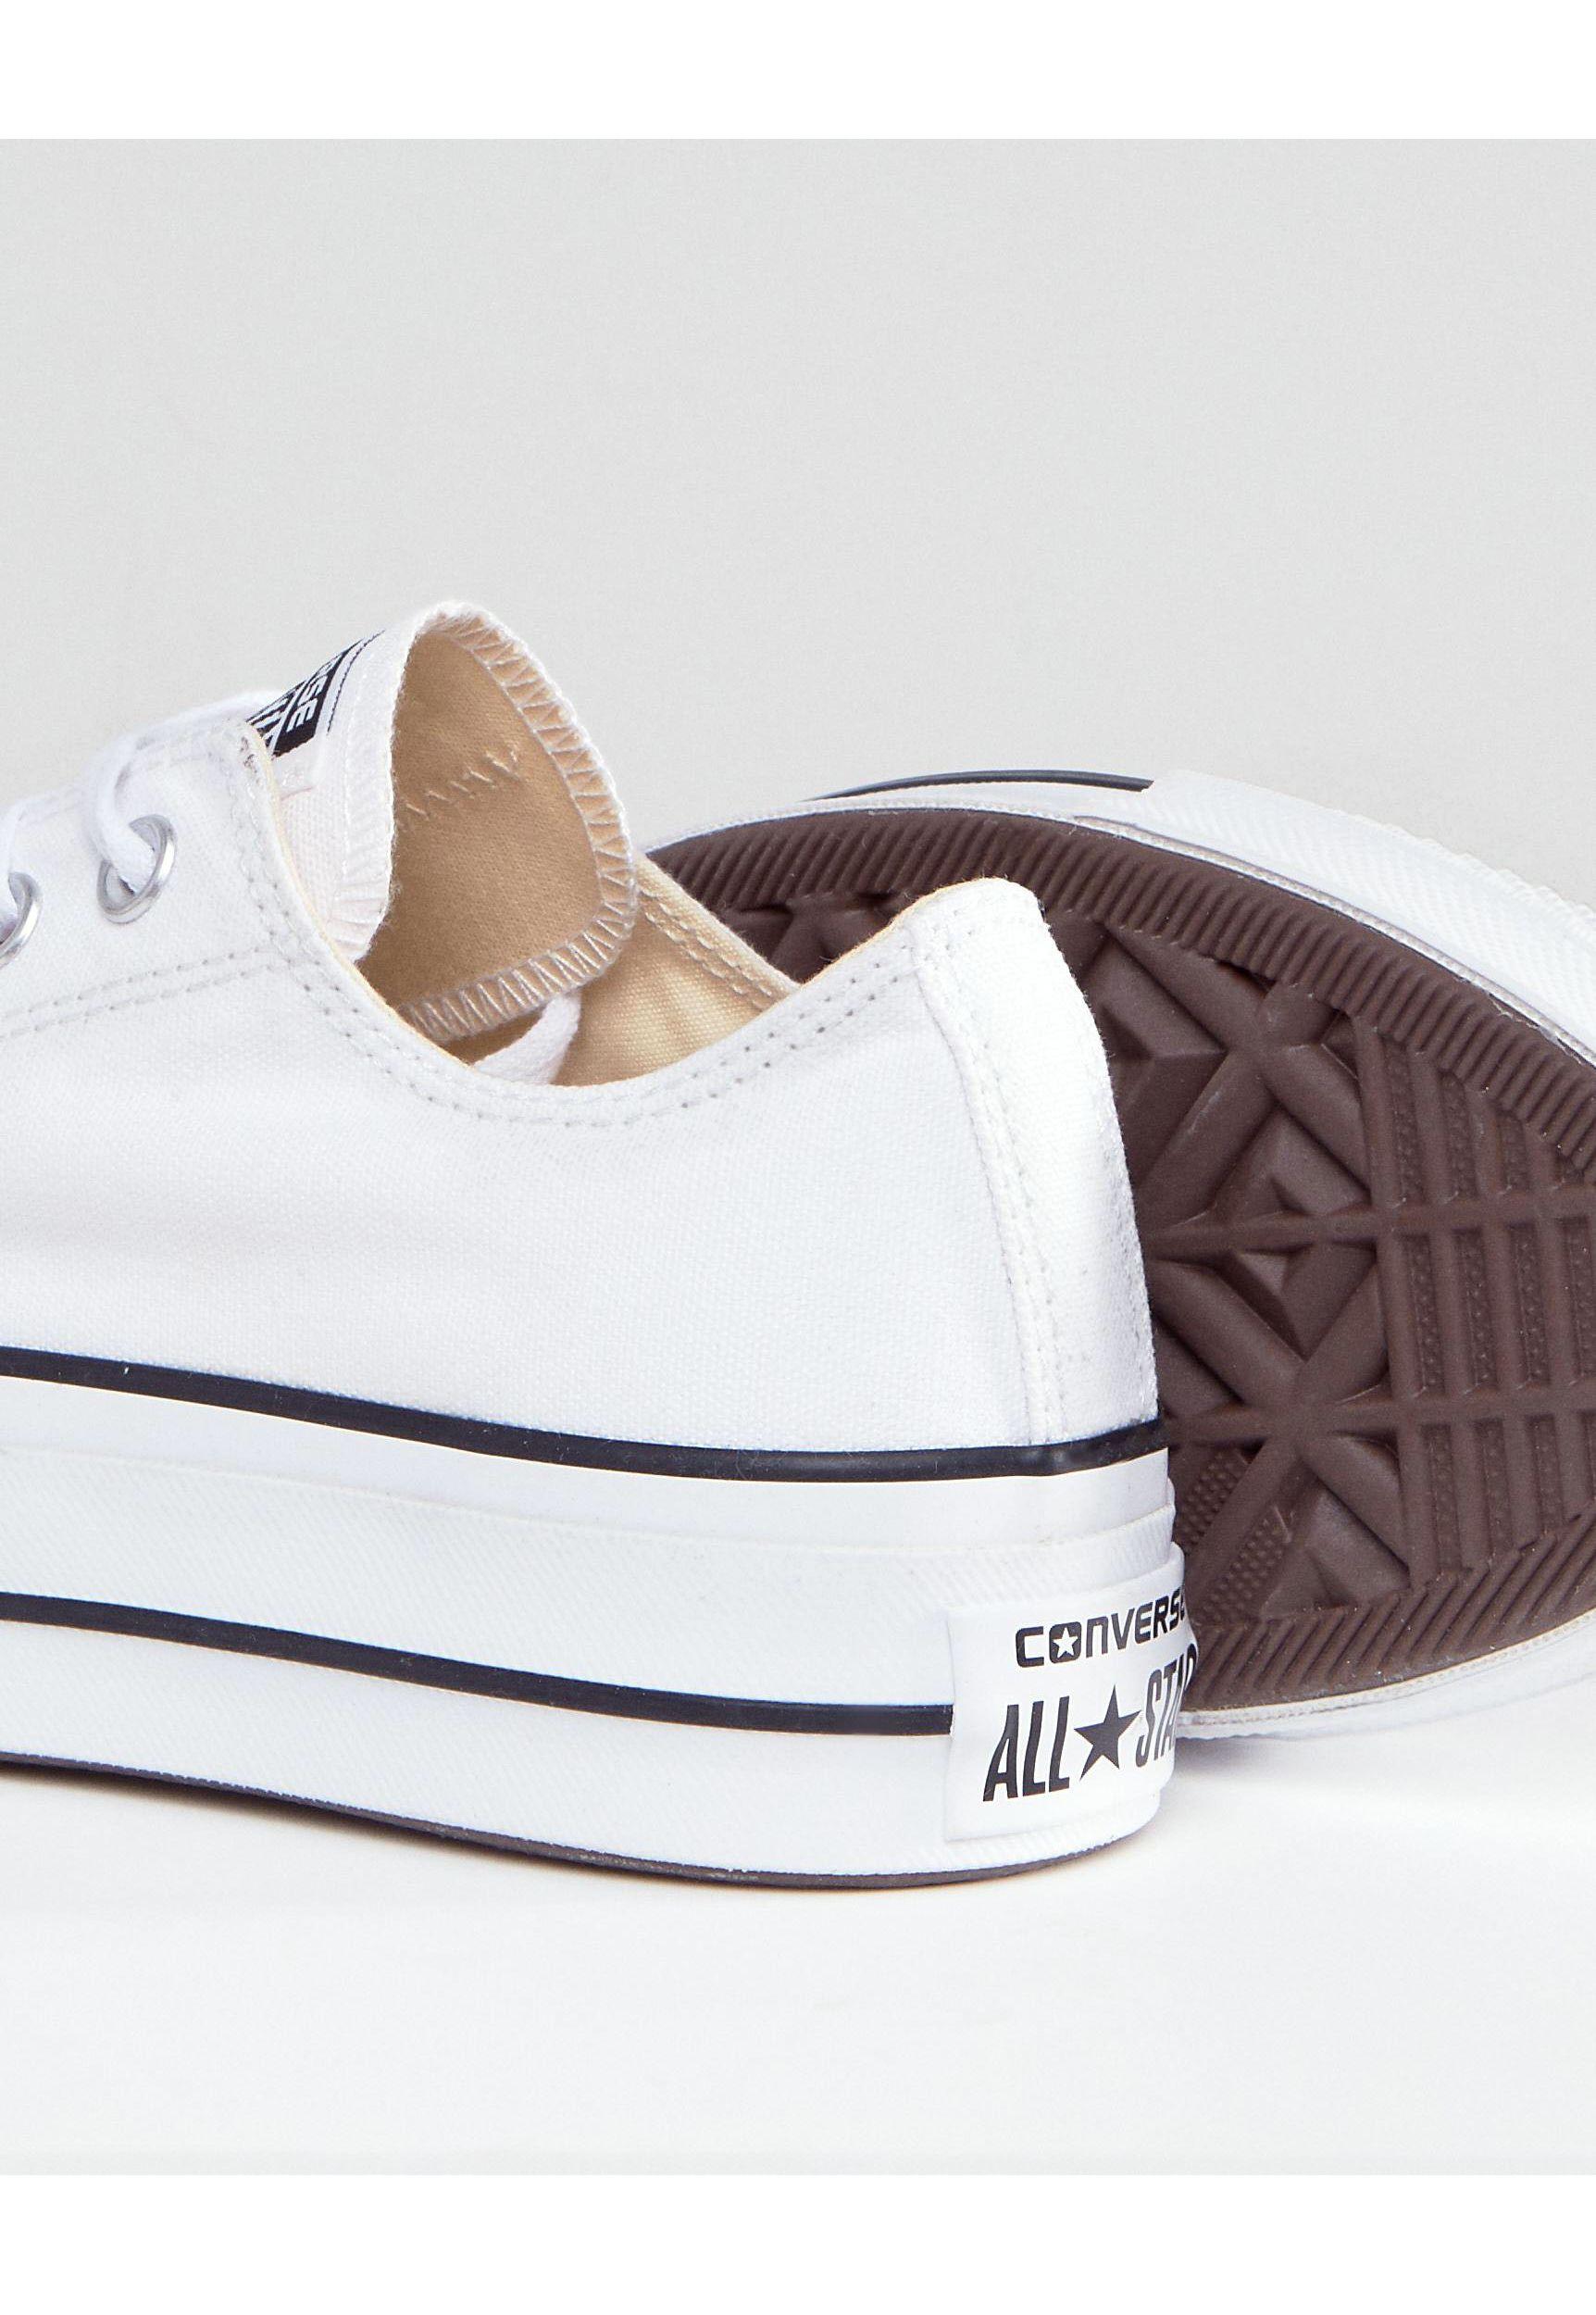 Converse Chuck Taylor All Star Platform Ox Trainers in White | Lyst